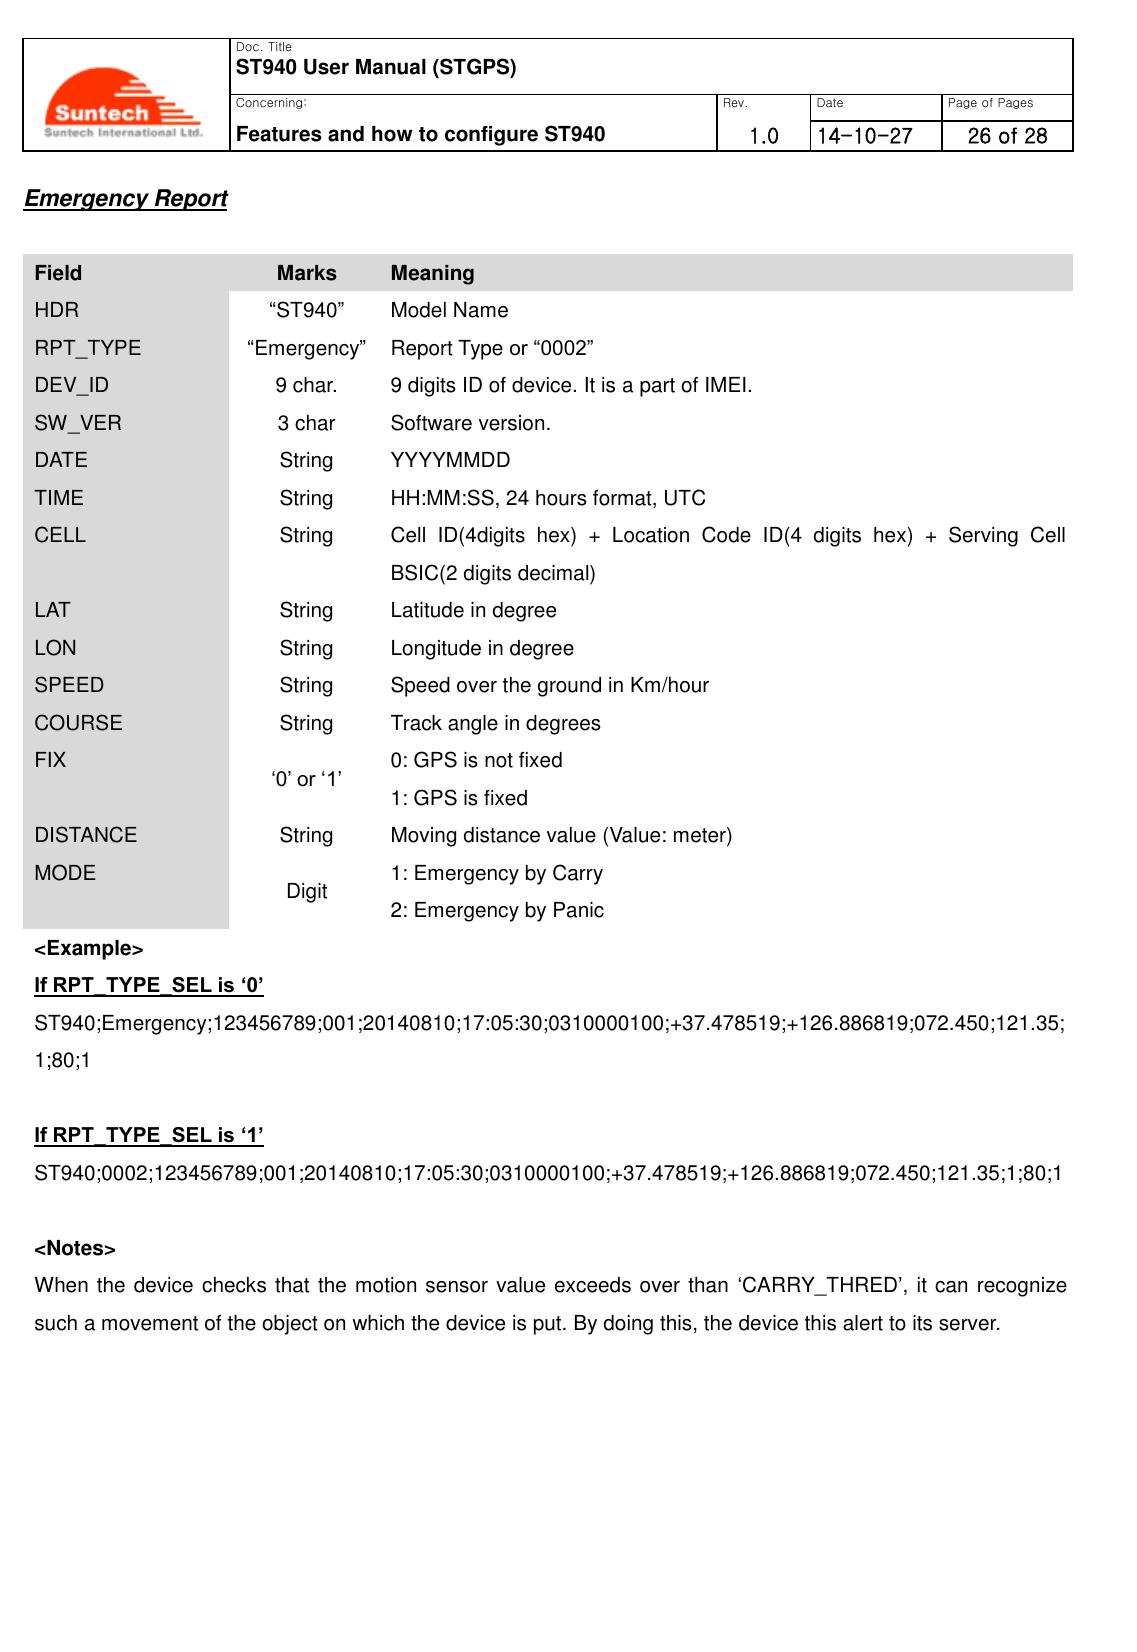   Doc. Title ST940 User Manual (STGPS) Concerning: Rev. Date Page of Pages Features and how to configure ST940 1.0 0      14-10-27 26 of 28  Emergency Report  Field Marks Meaning HDR “ST940” Model Name RPT_TYPE “Emergency” Report Type or “0002” DEV_ID 9 char. 9 digits ID of device. It is a part of IMEI. SW_VER 3 char Software version.   DATE String YYYYMMDD TIME String HH:MM:SS, 24 hours format, UTC CELL String Cell  ID(4digits  hex)  +  Location  Code  ID(4  digits  hex)  +  Serving  Cell BSIC(2 digits decimal) LAT String Latitude in degree LON String Longitude in degree SPEED String Speed over the ground in Km/hour COURSE String Track angle in degrees FIX ‘0’ or ‘1’ 0: GPS is not fixed   1: GPS is fixed DISTANCE String Moving distance value (Value: meter) MODE Digit 1: Emergency by Carry 2: Emergency by Panic &lt;Example&gt; If RPT_TYPE_SEL is ‘0’ ST940;Emergency;123456789;001;20140810;17:05:30;0310000100;+37.478519;+126.886819;072.450;121.35;1;80;1  If RPT_TYPE_SEL is ‘1’ ST940;0002;123456789;001;20140810;17:05:30;0310000100;+37.478519;+126.886819;072.450;121.35;1;80;1  &lt;Notes&gt; When the device checks that the motion sensor value exceeds over than ‘CARRY_THRED’, it can recognize such a movement of the object on which the device is put. By doing this, the device this alert to its server.        